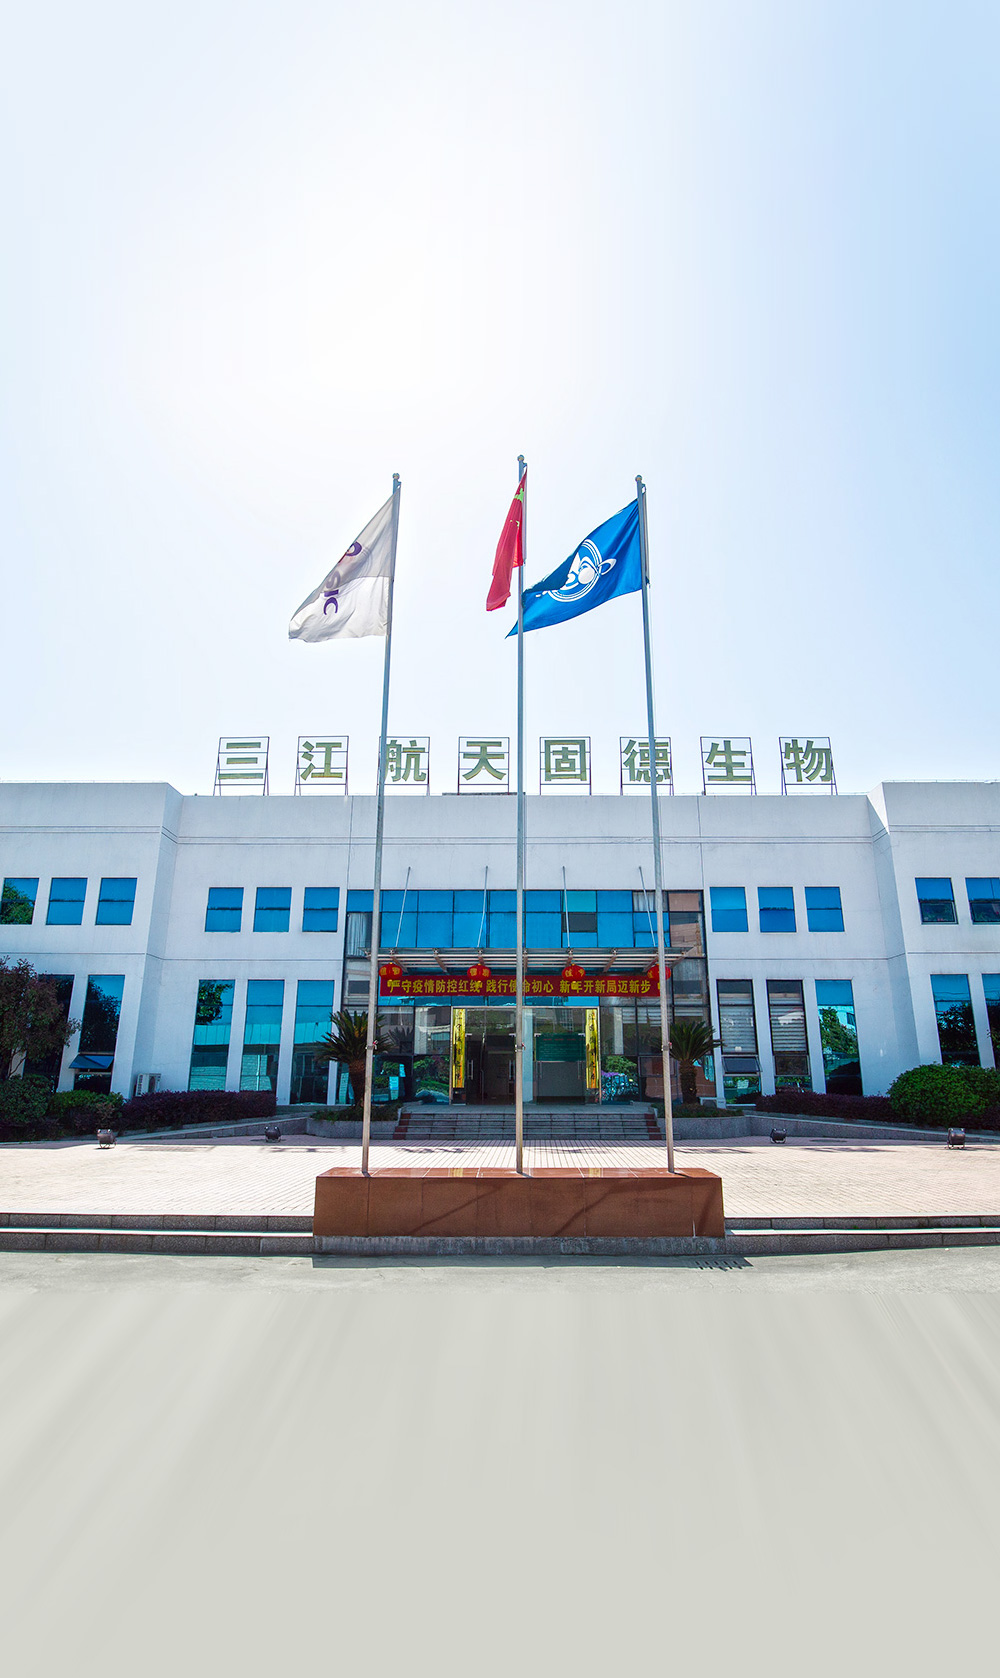 China Sodium Lactate factory and manufacturers